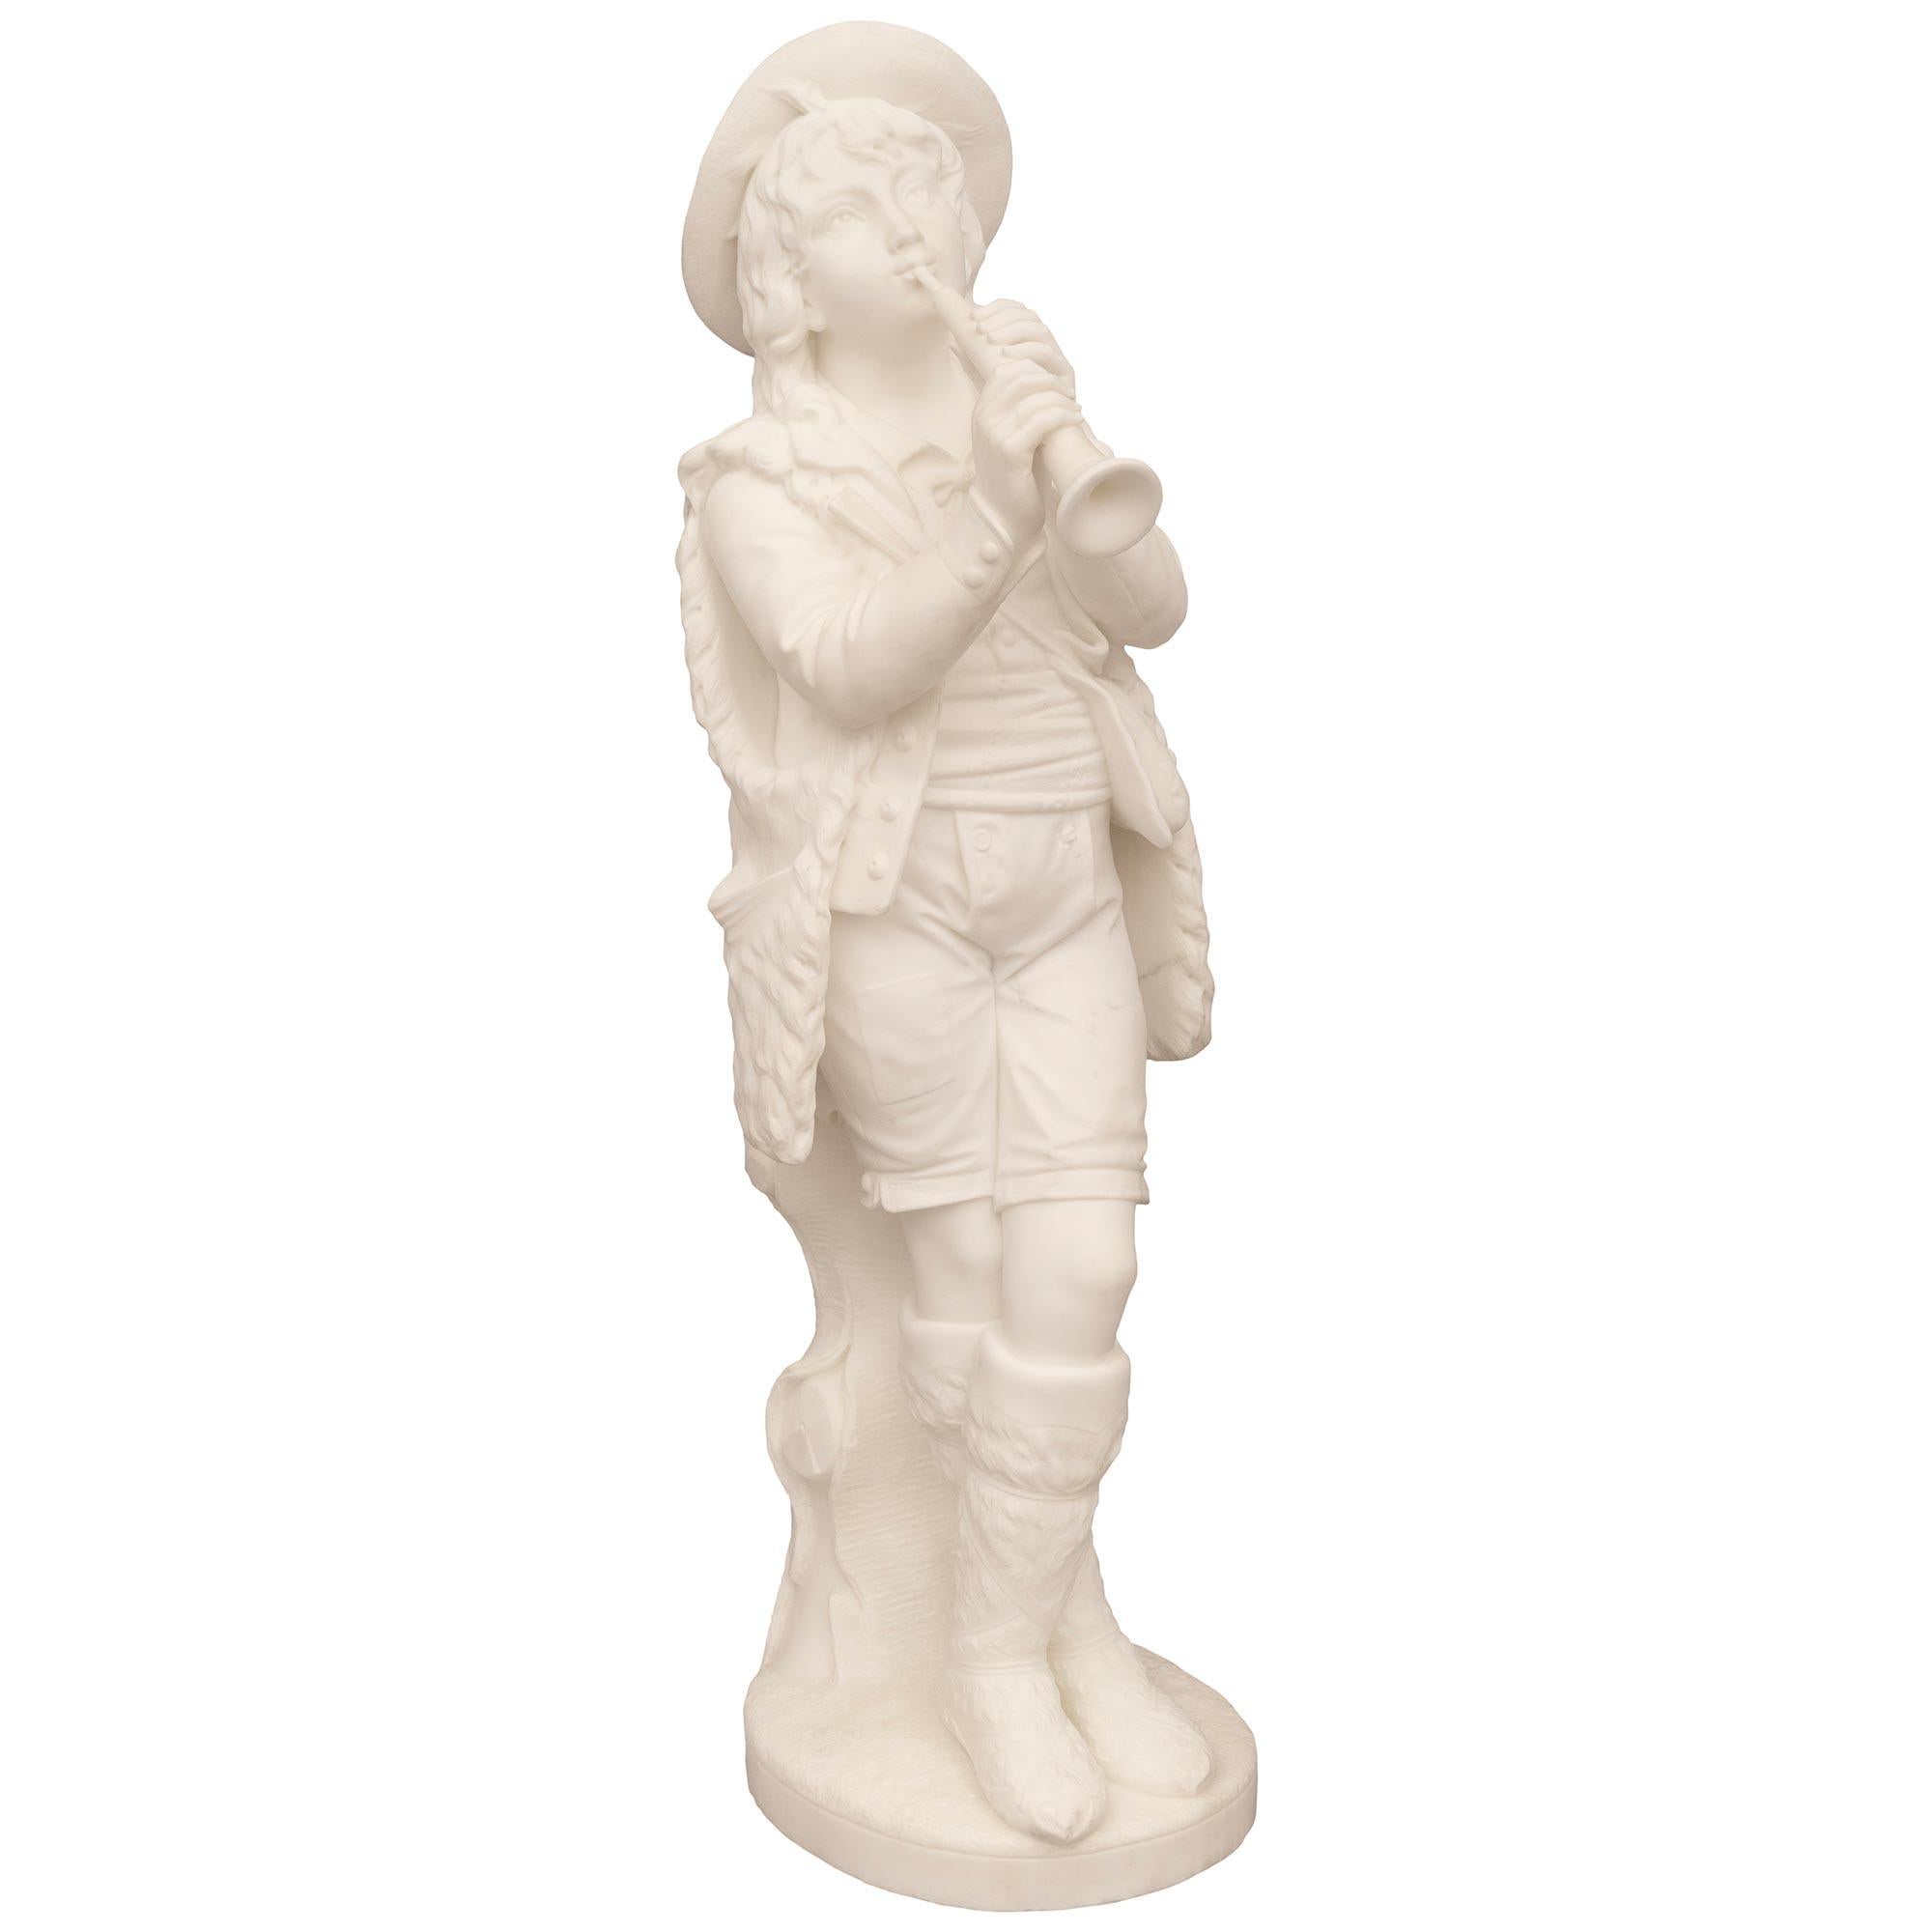 Italian 19th century white Carrara marble statue, signed G.F. Lapini In Good Condition For Sale In West Palm Beach, FL